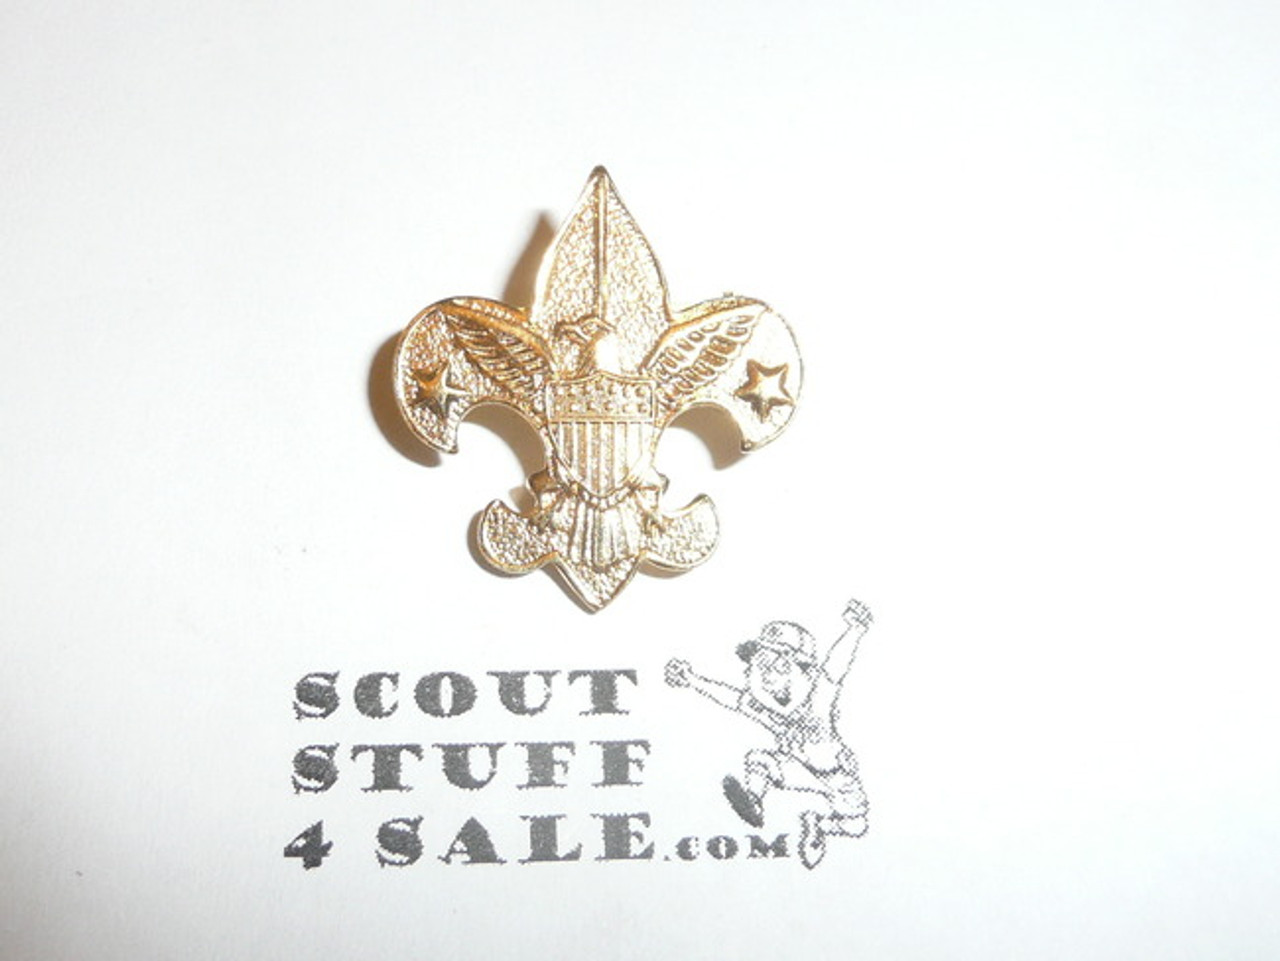 Tenderfoot Scout Rank Pin (Could be used as Generic Scouting Collar Pin), Spin Lock Clasp, 22mm Wide, NO back markings